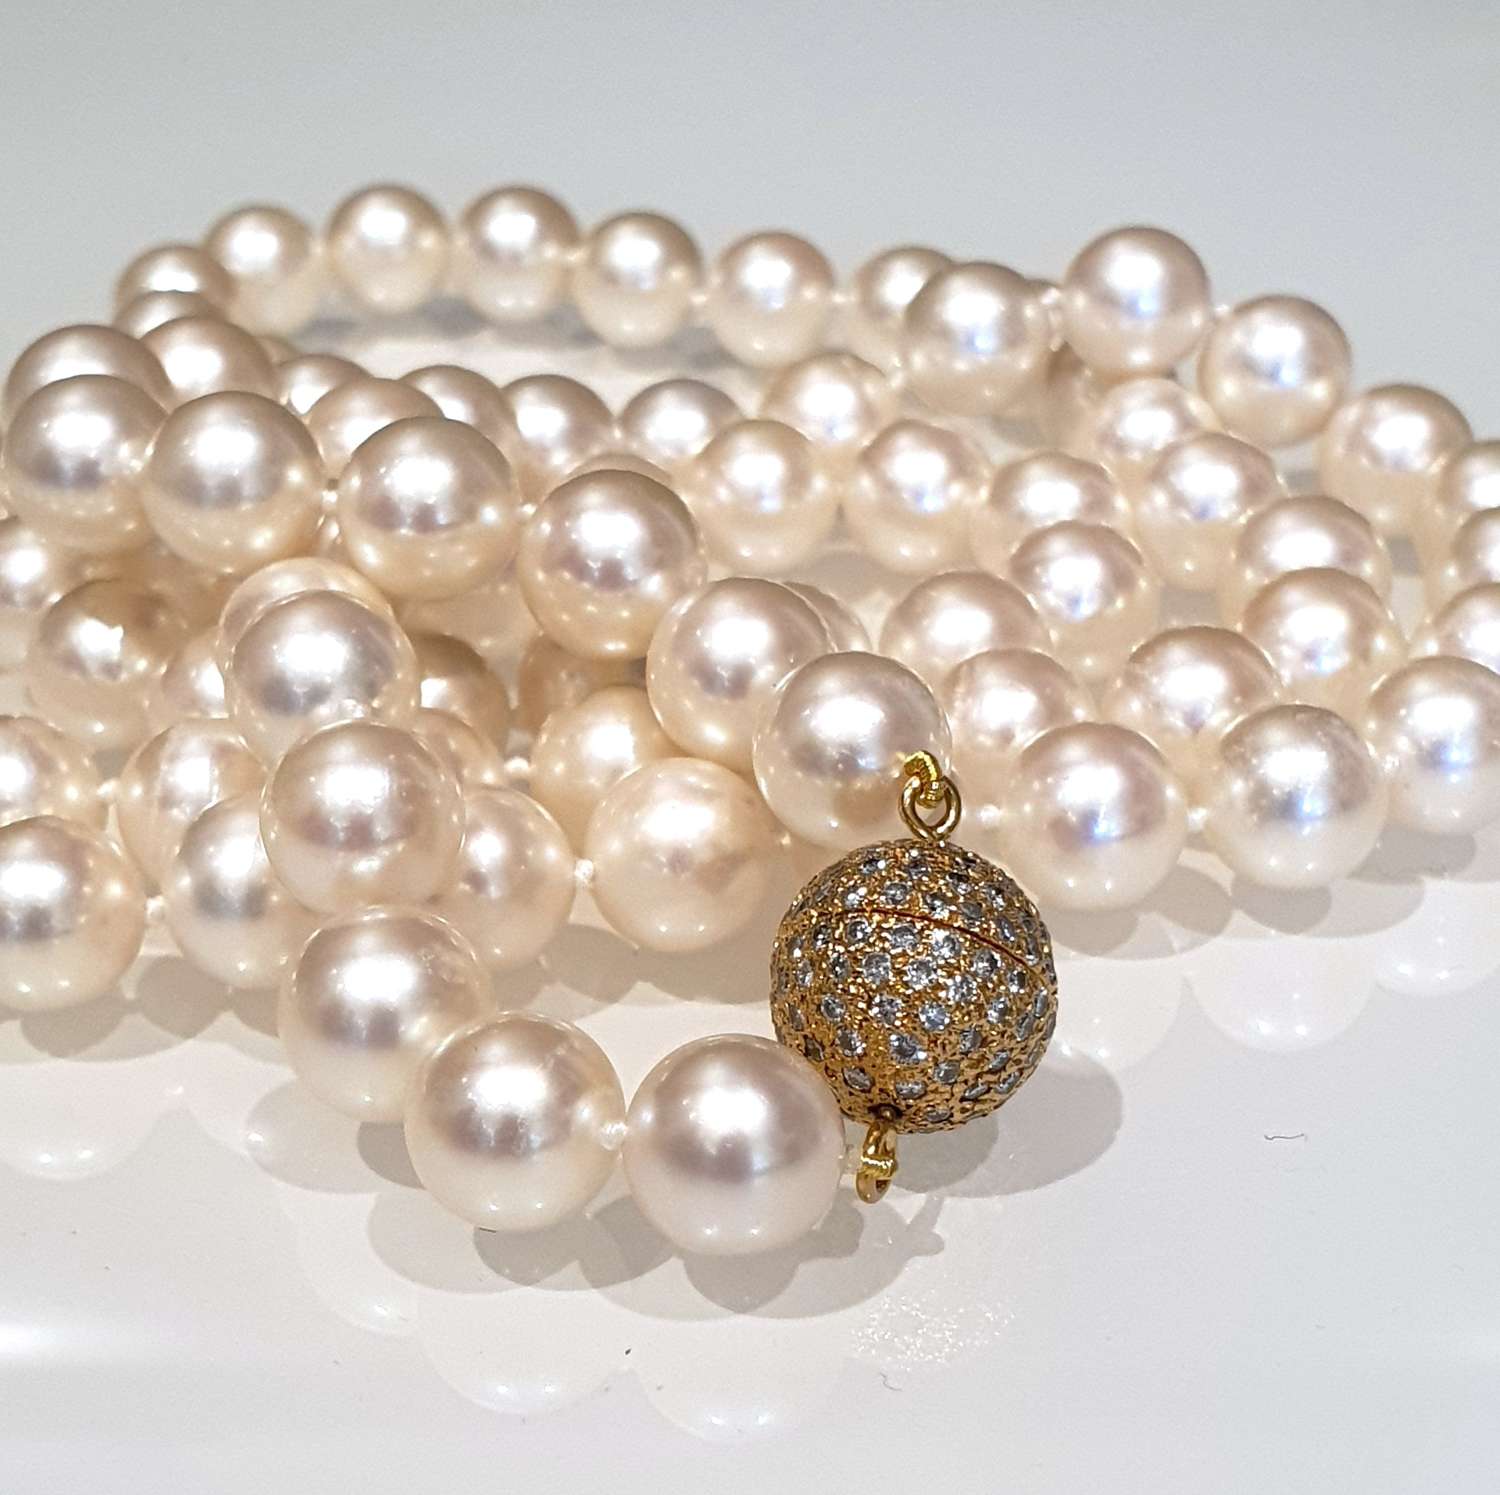 9mm Akoya cultured pearl necklace 36 inches long